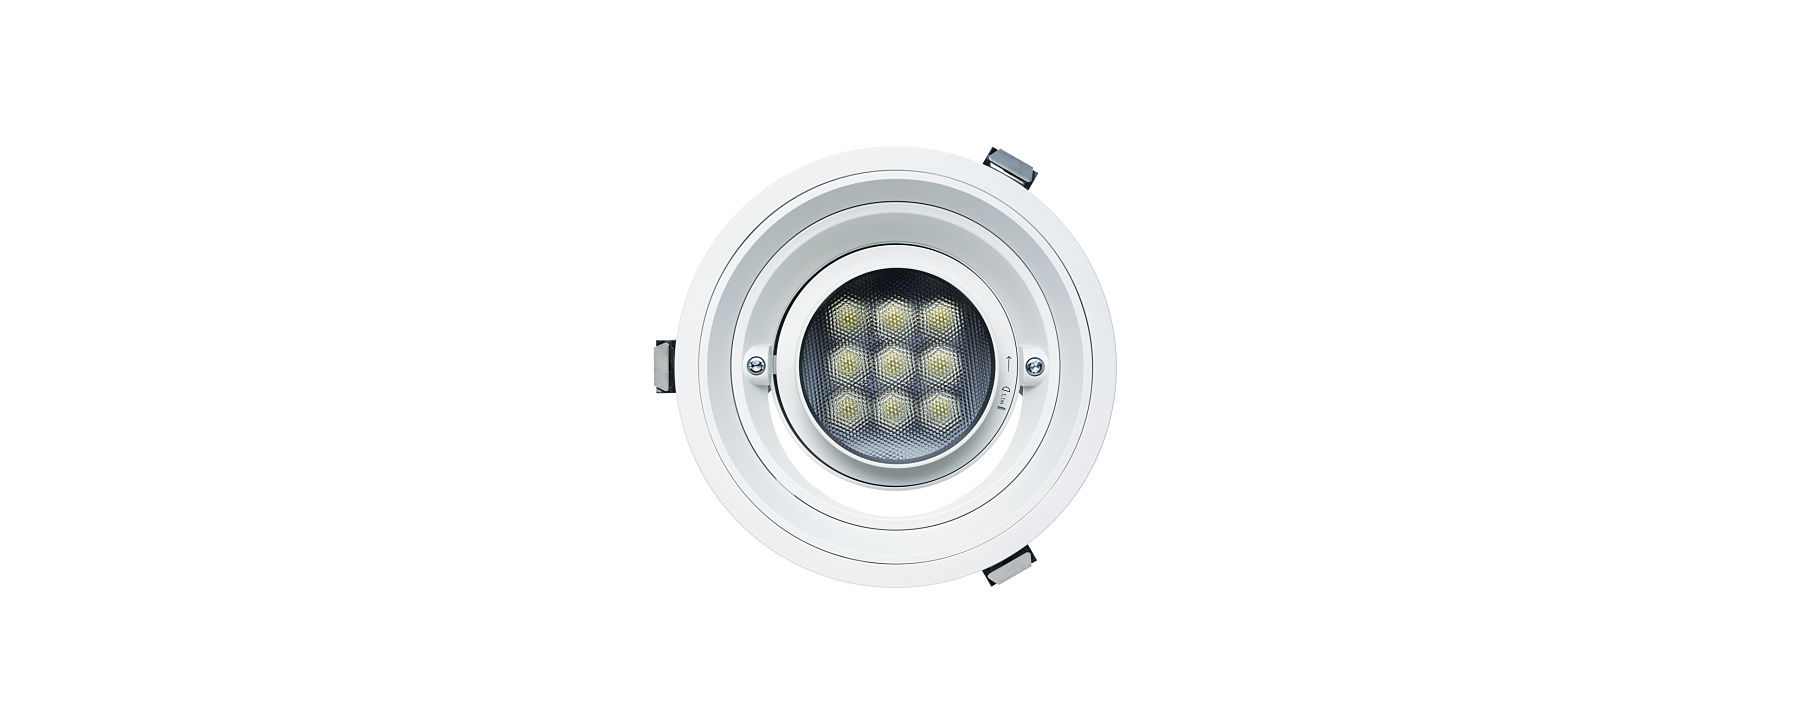 Quintessence round - Recessed spotlights, recessed floodlights and recessed wallwashers